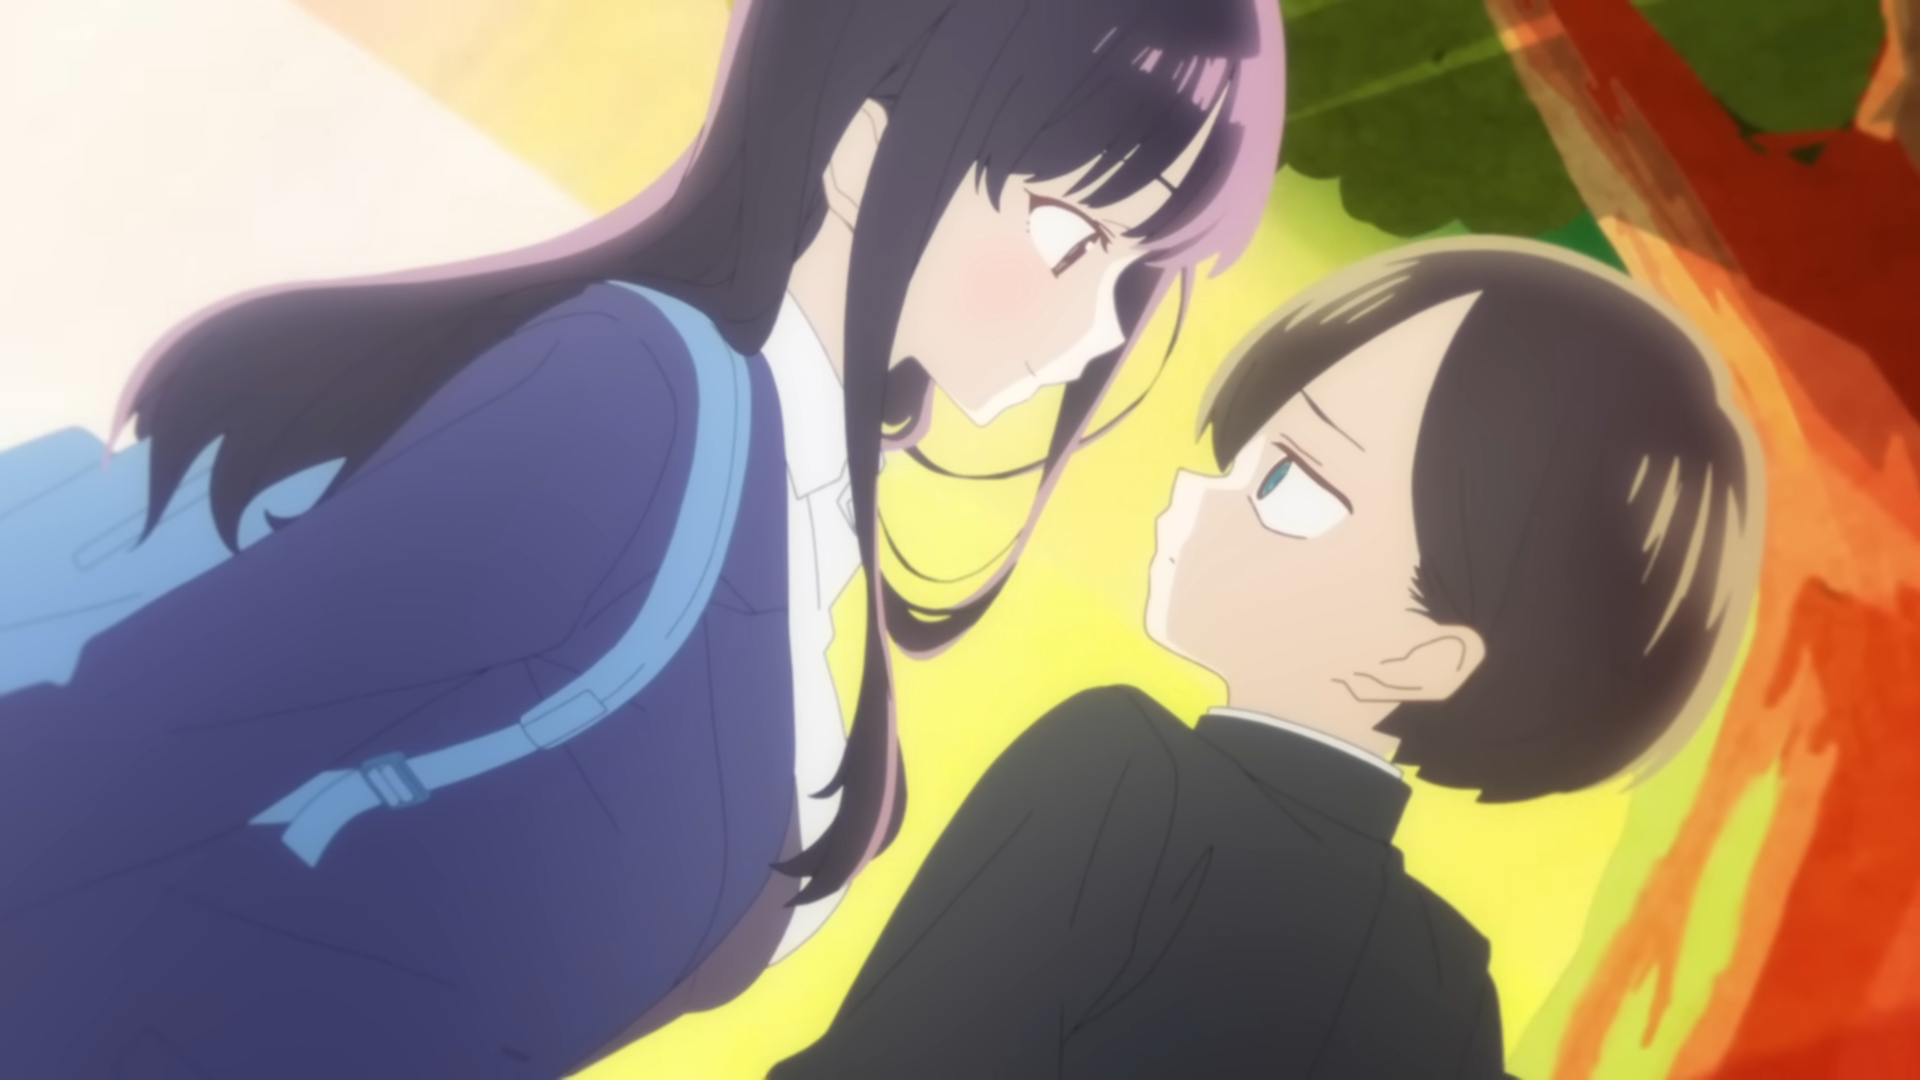 Crunchyroll Dangers in My Heart TV Anime Shares Episode 6's Emotional Moment in New Visual